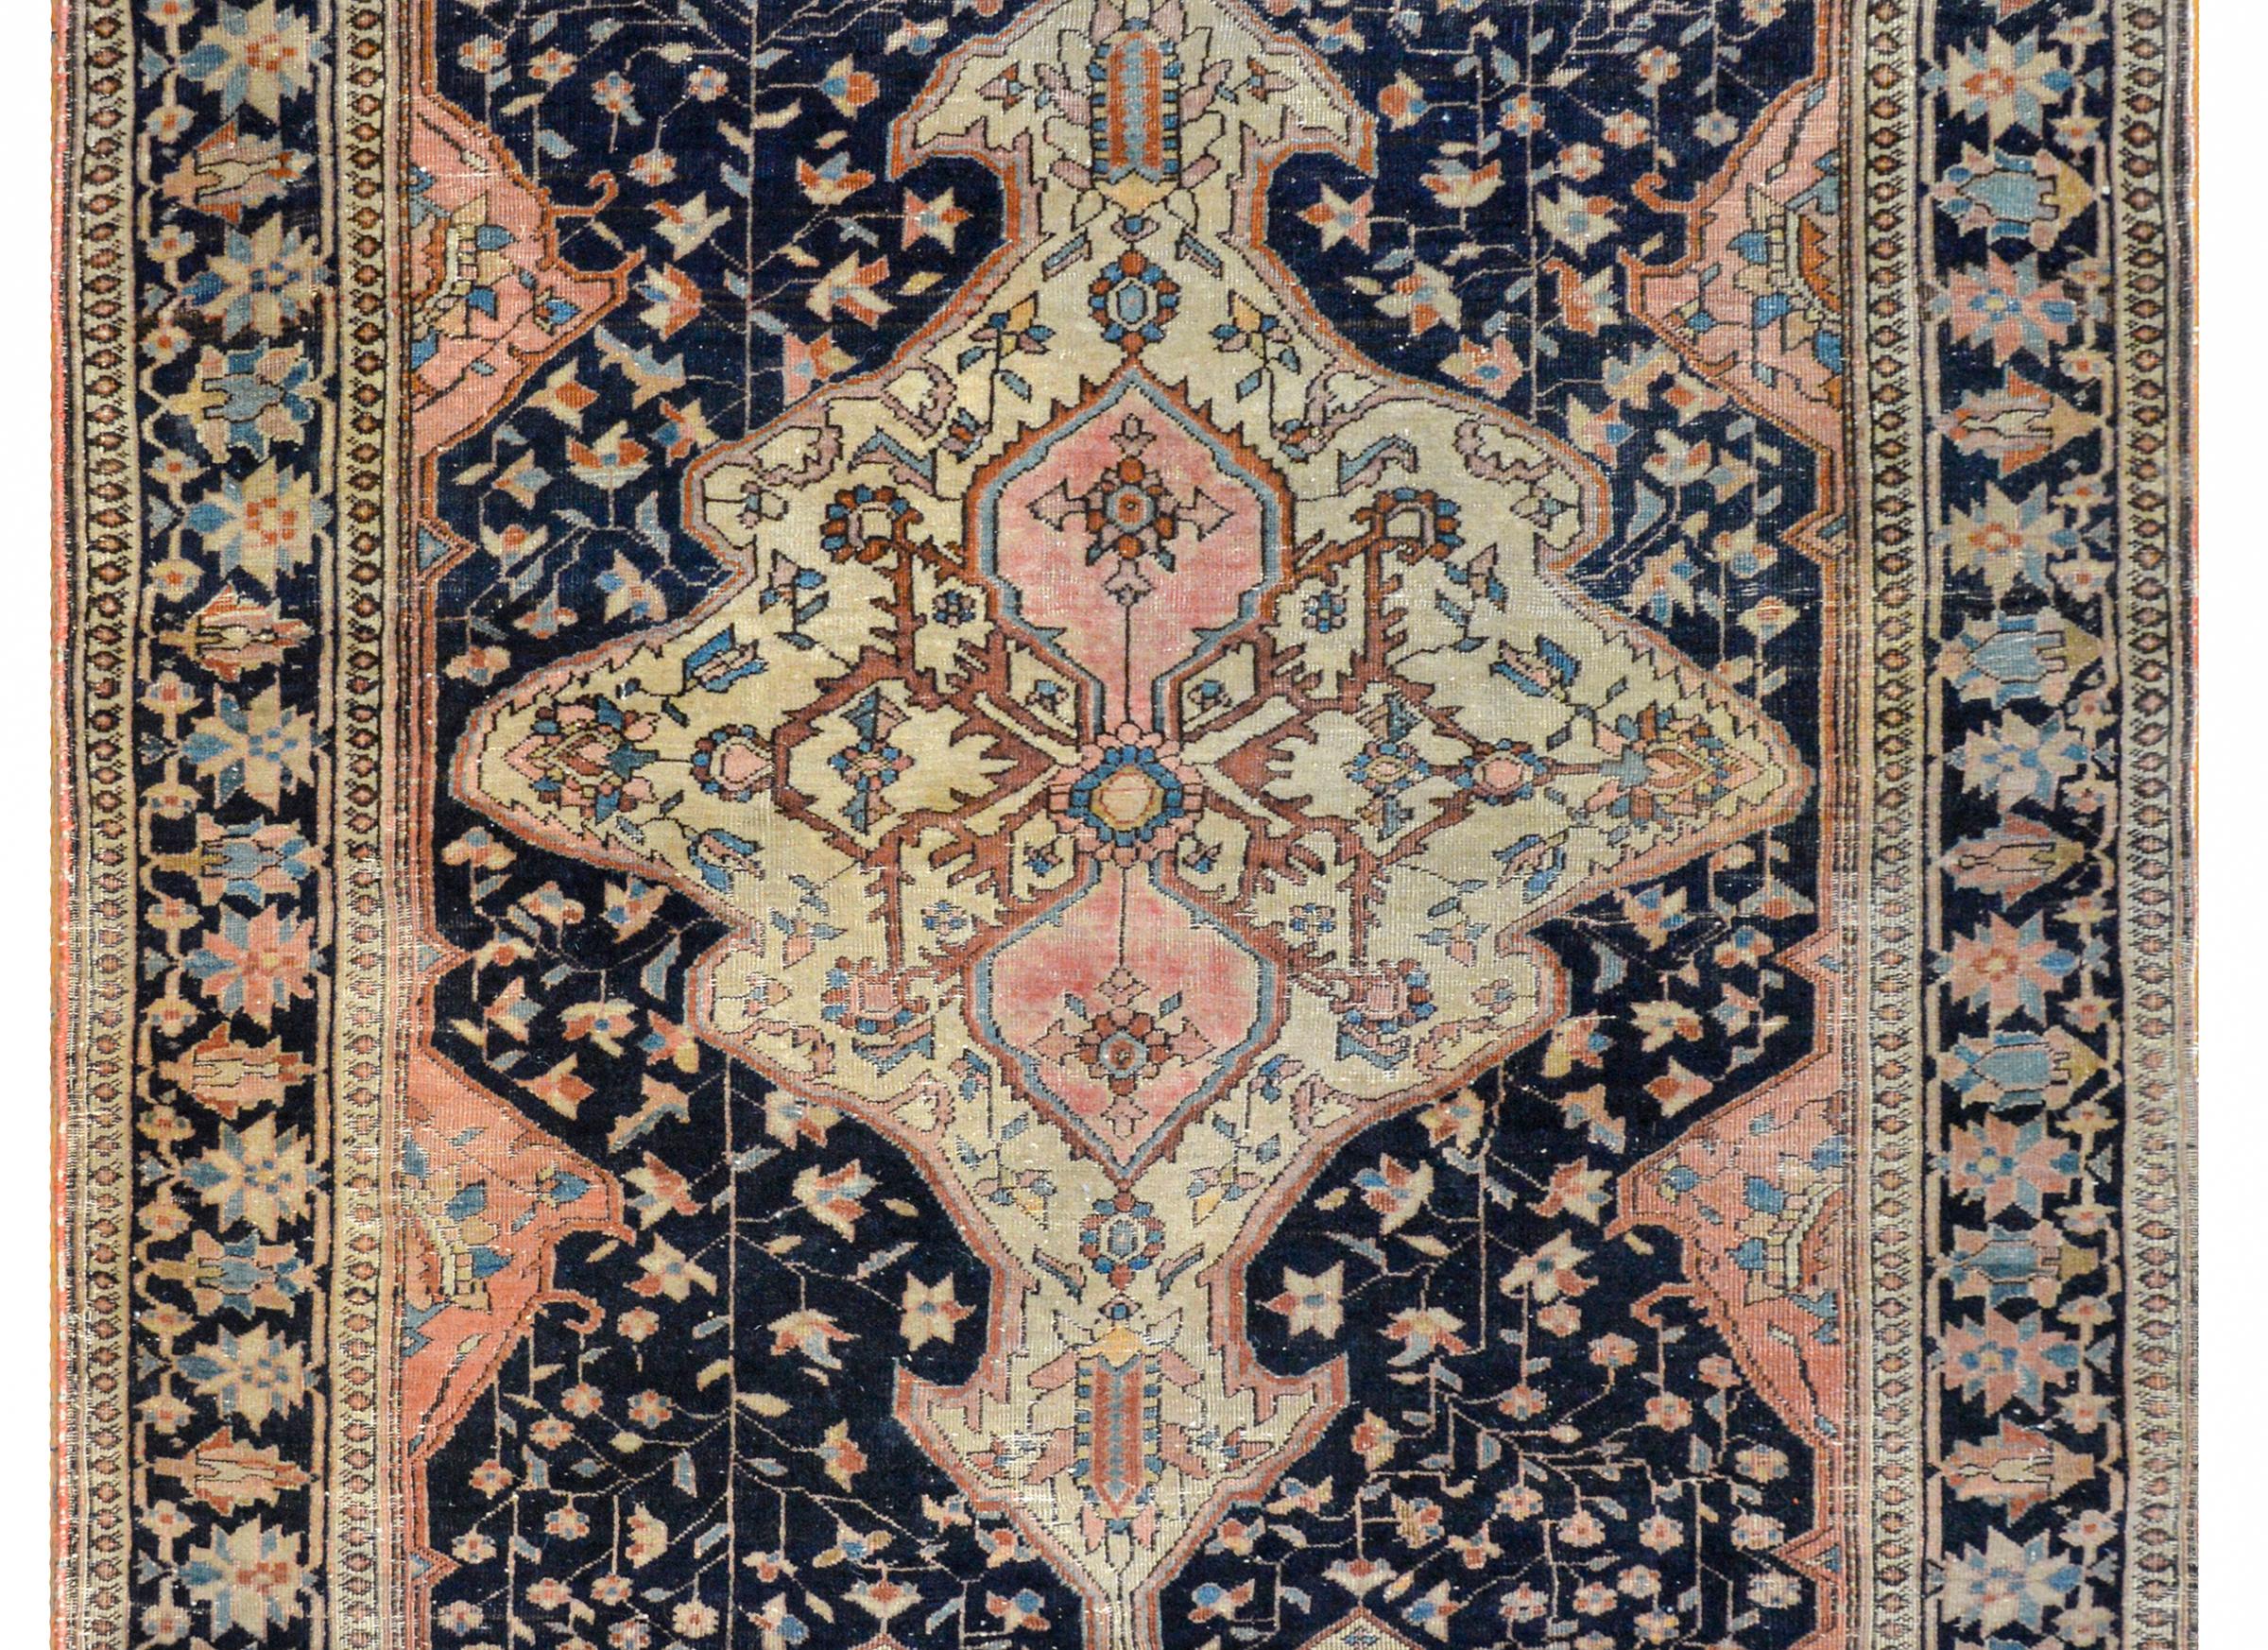 A beautiful early 20th century Sarouk Farahan rug with a multi-lobed medallion with a floral and scrolling vine pattern woven in dark red, indigo, gold, and brown vegetable dyed wool on a cream colored background, amidst an indigo field of flowers